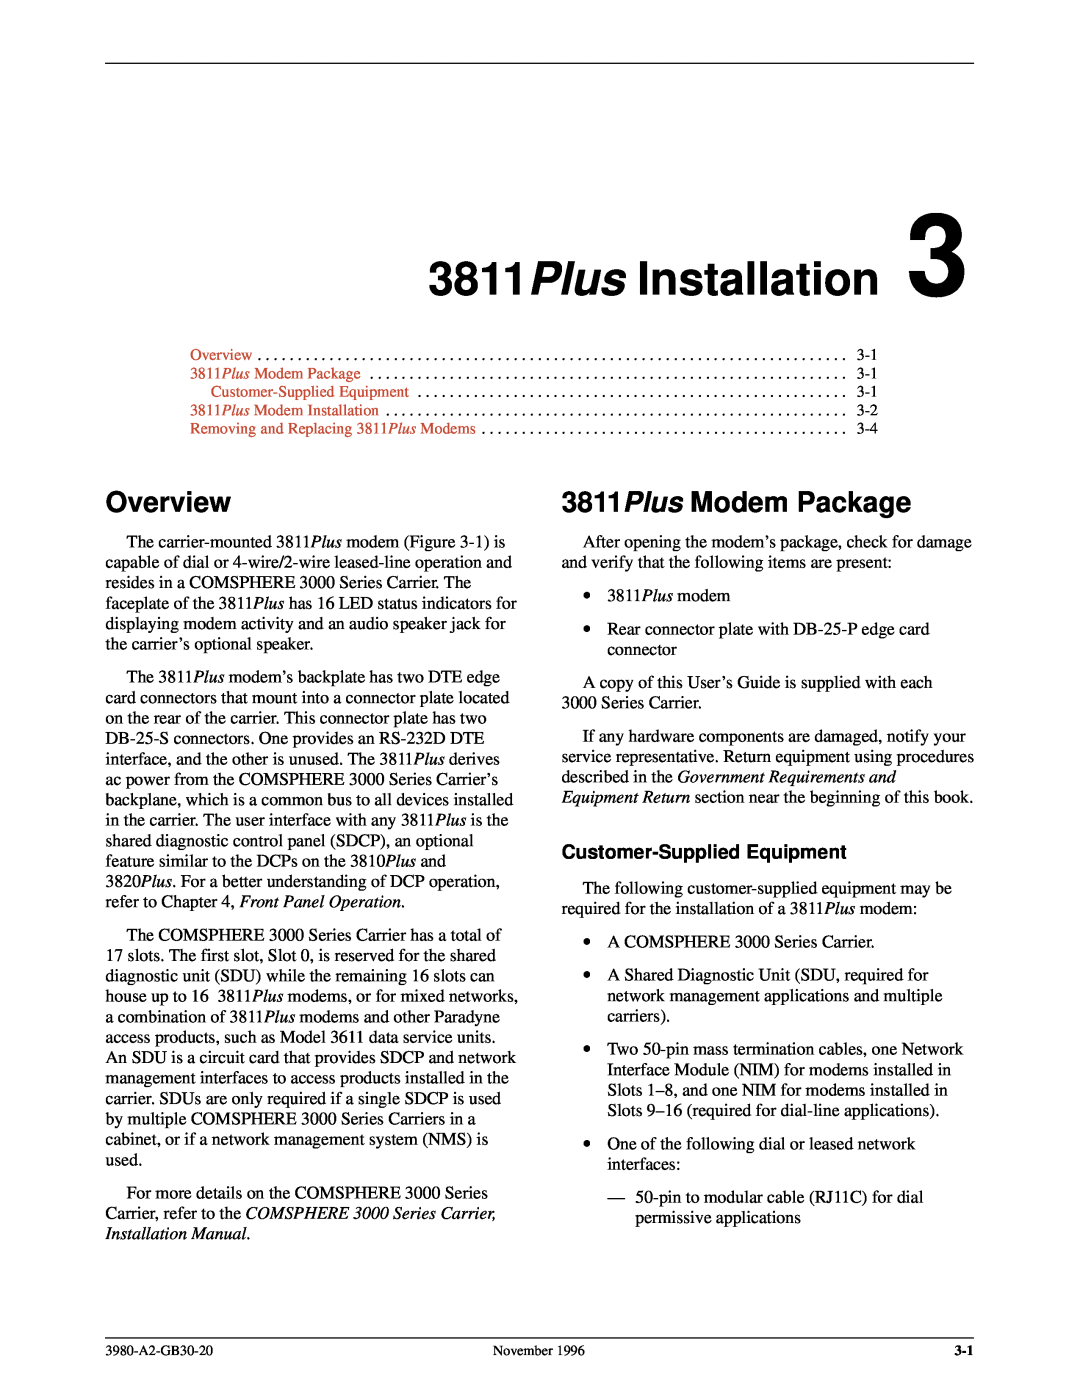 Paradyne 3800PLUS manual 3811Plus Installation, 3811Plus Modem Package, Overview, Customer-Supplied Equipment 